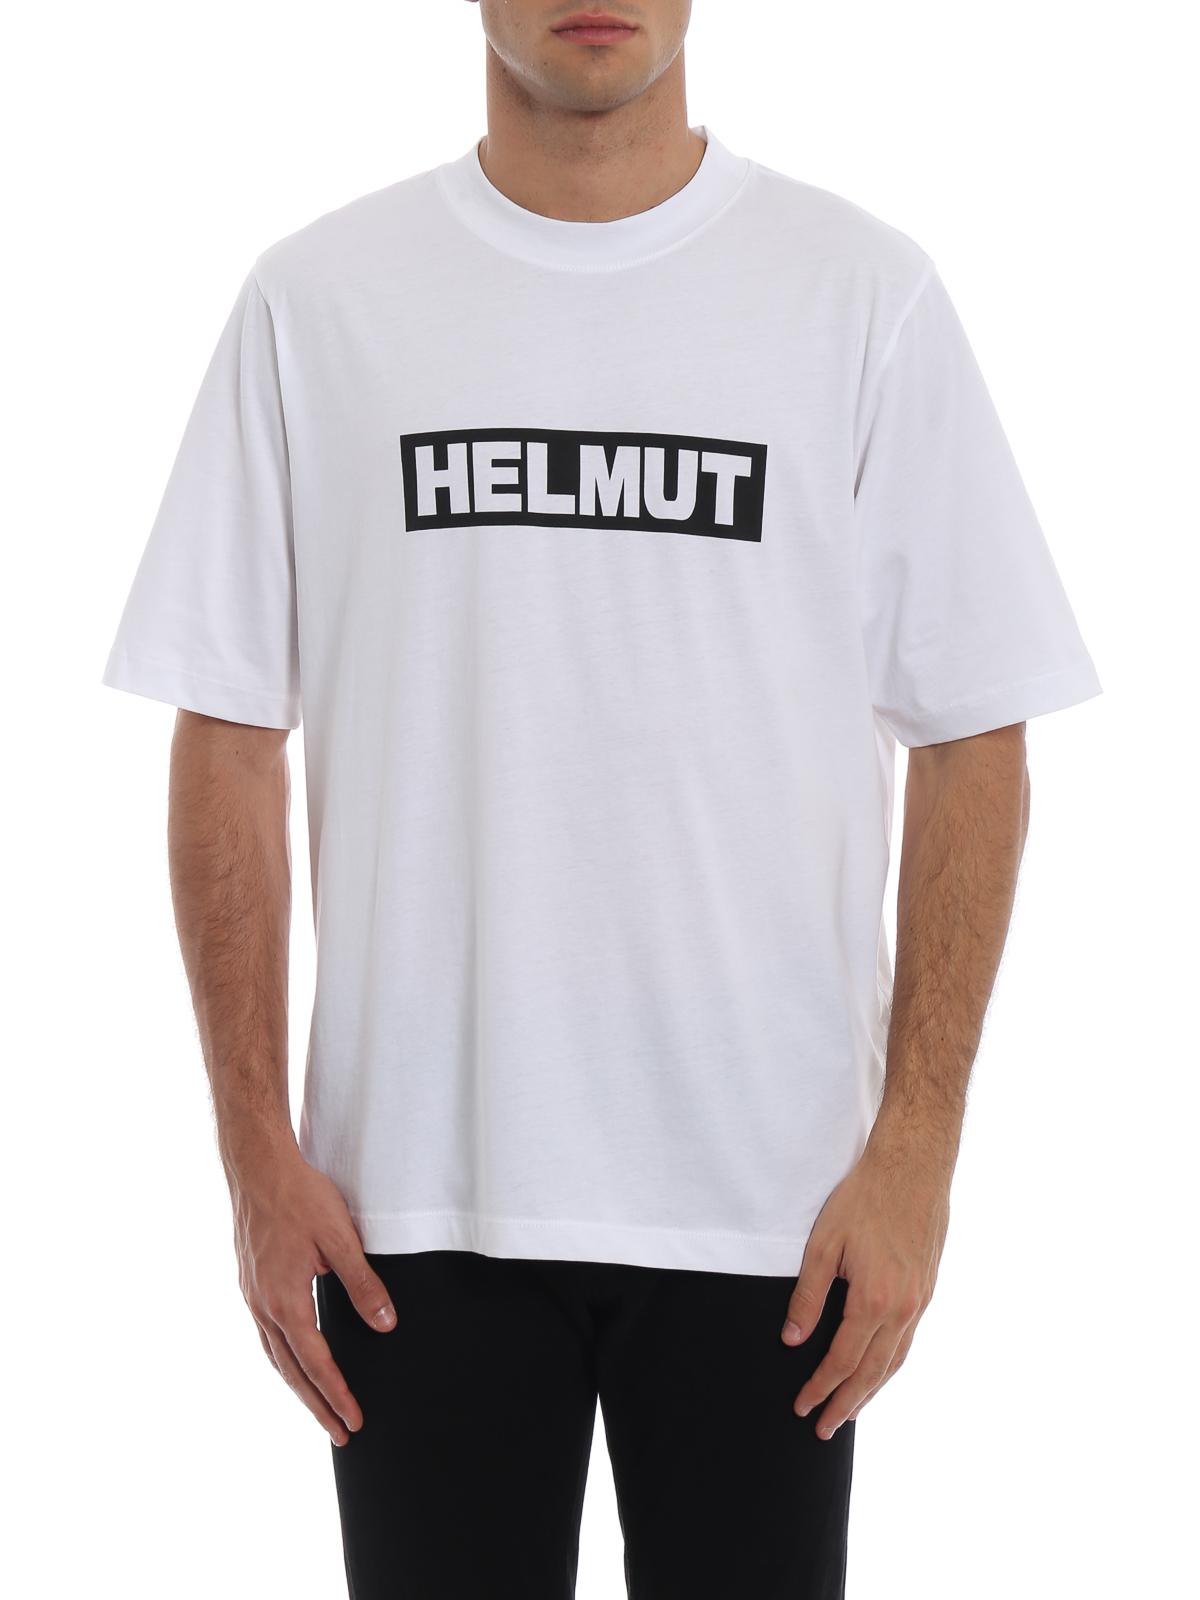 Tシャツ Helmut Lang - Tシャツ - 白 - I04HM502100 | THEBS [iKRIX]